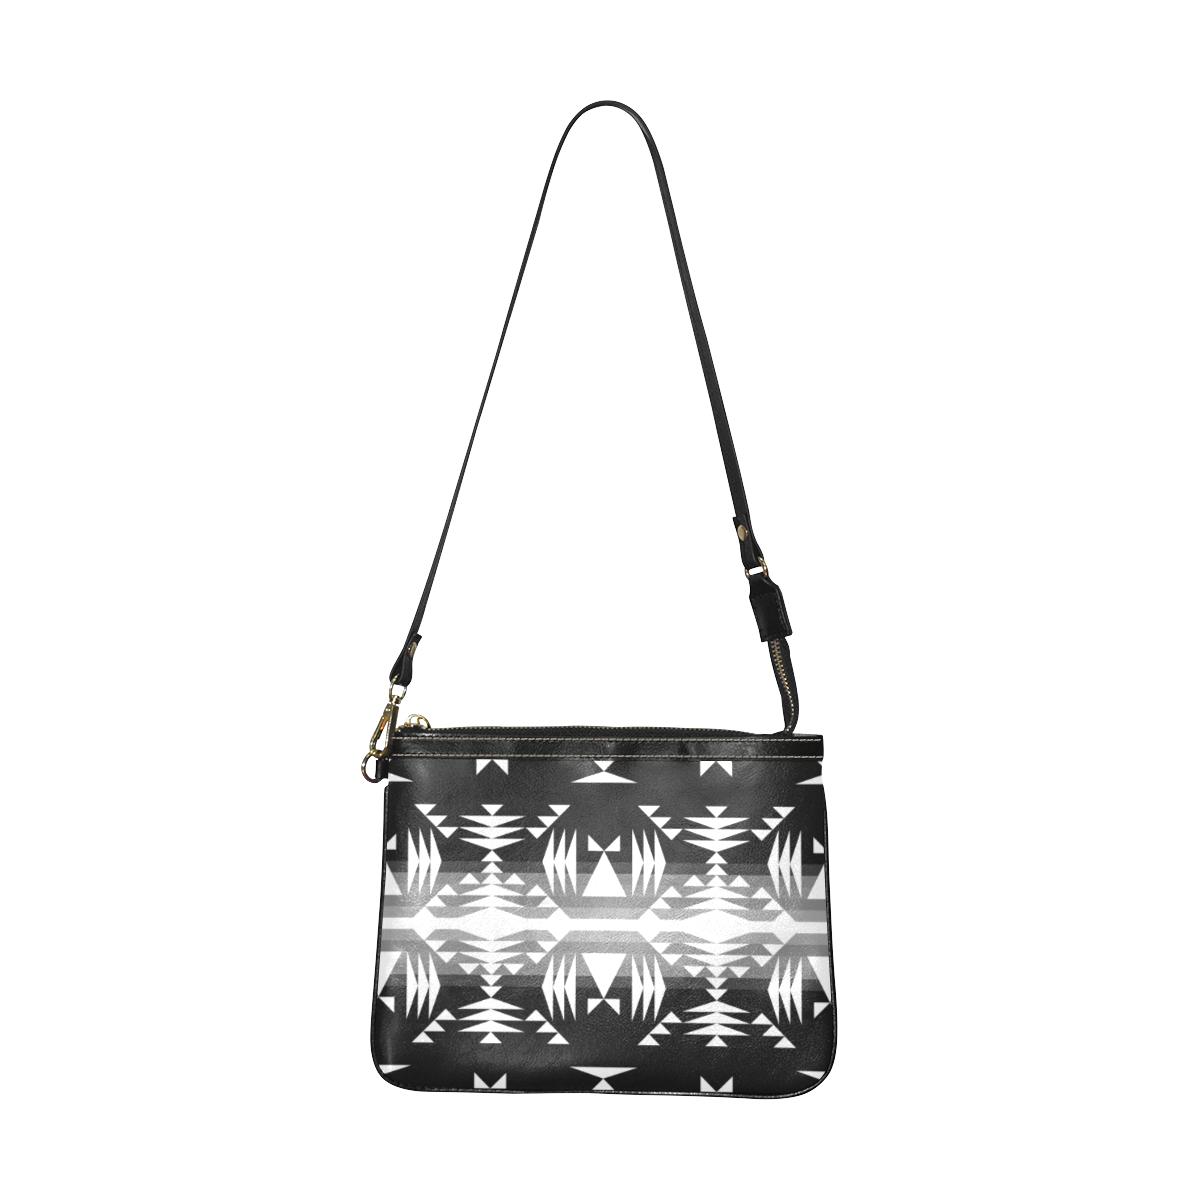 Between the Mountains Black and White Small Shoulder Bag (Model 1710) Small Shoulder Bag (1710) e-joyer 